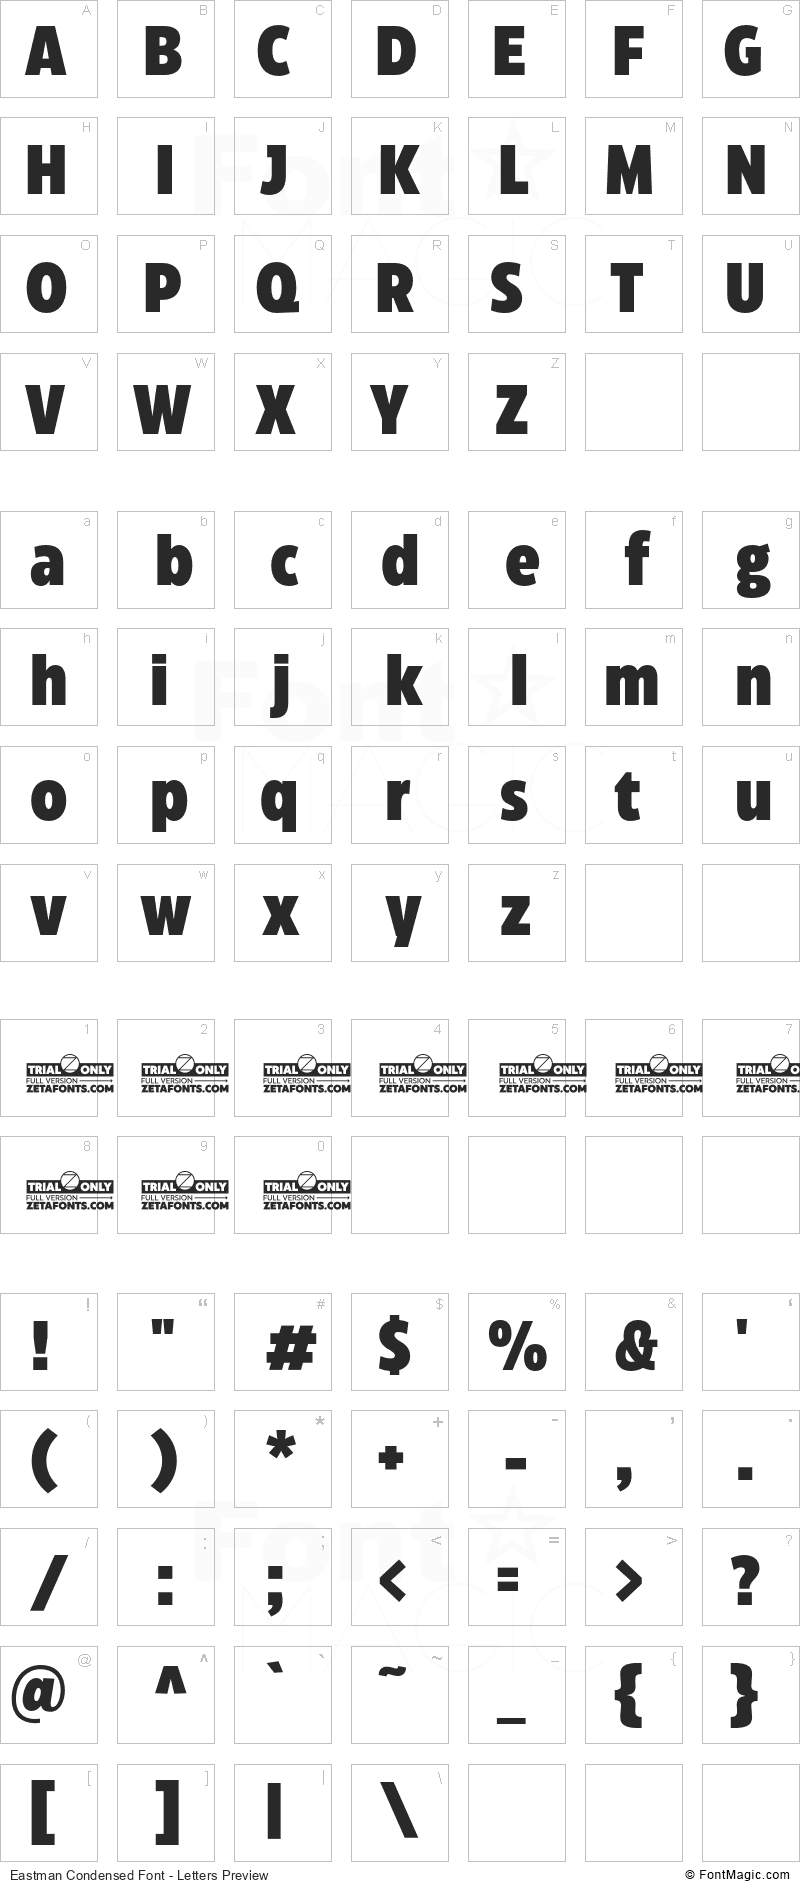 Eastman Condensed Font - All Latters Preview Chart